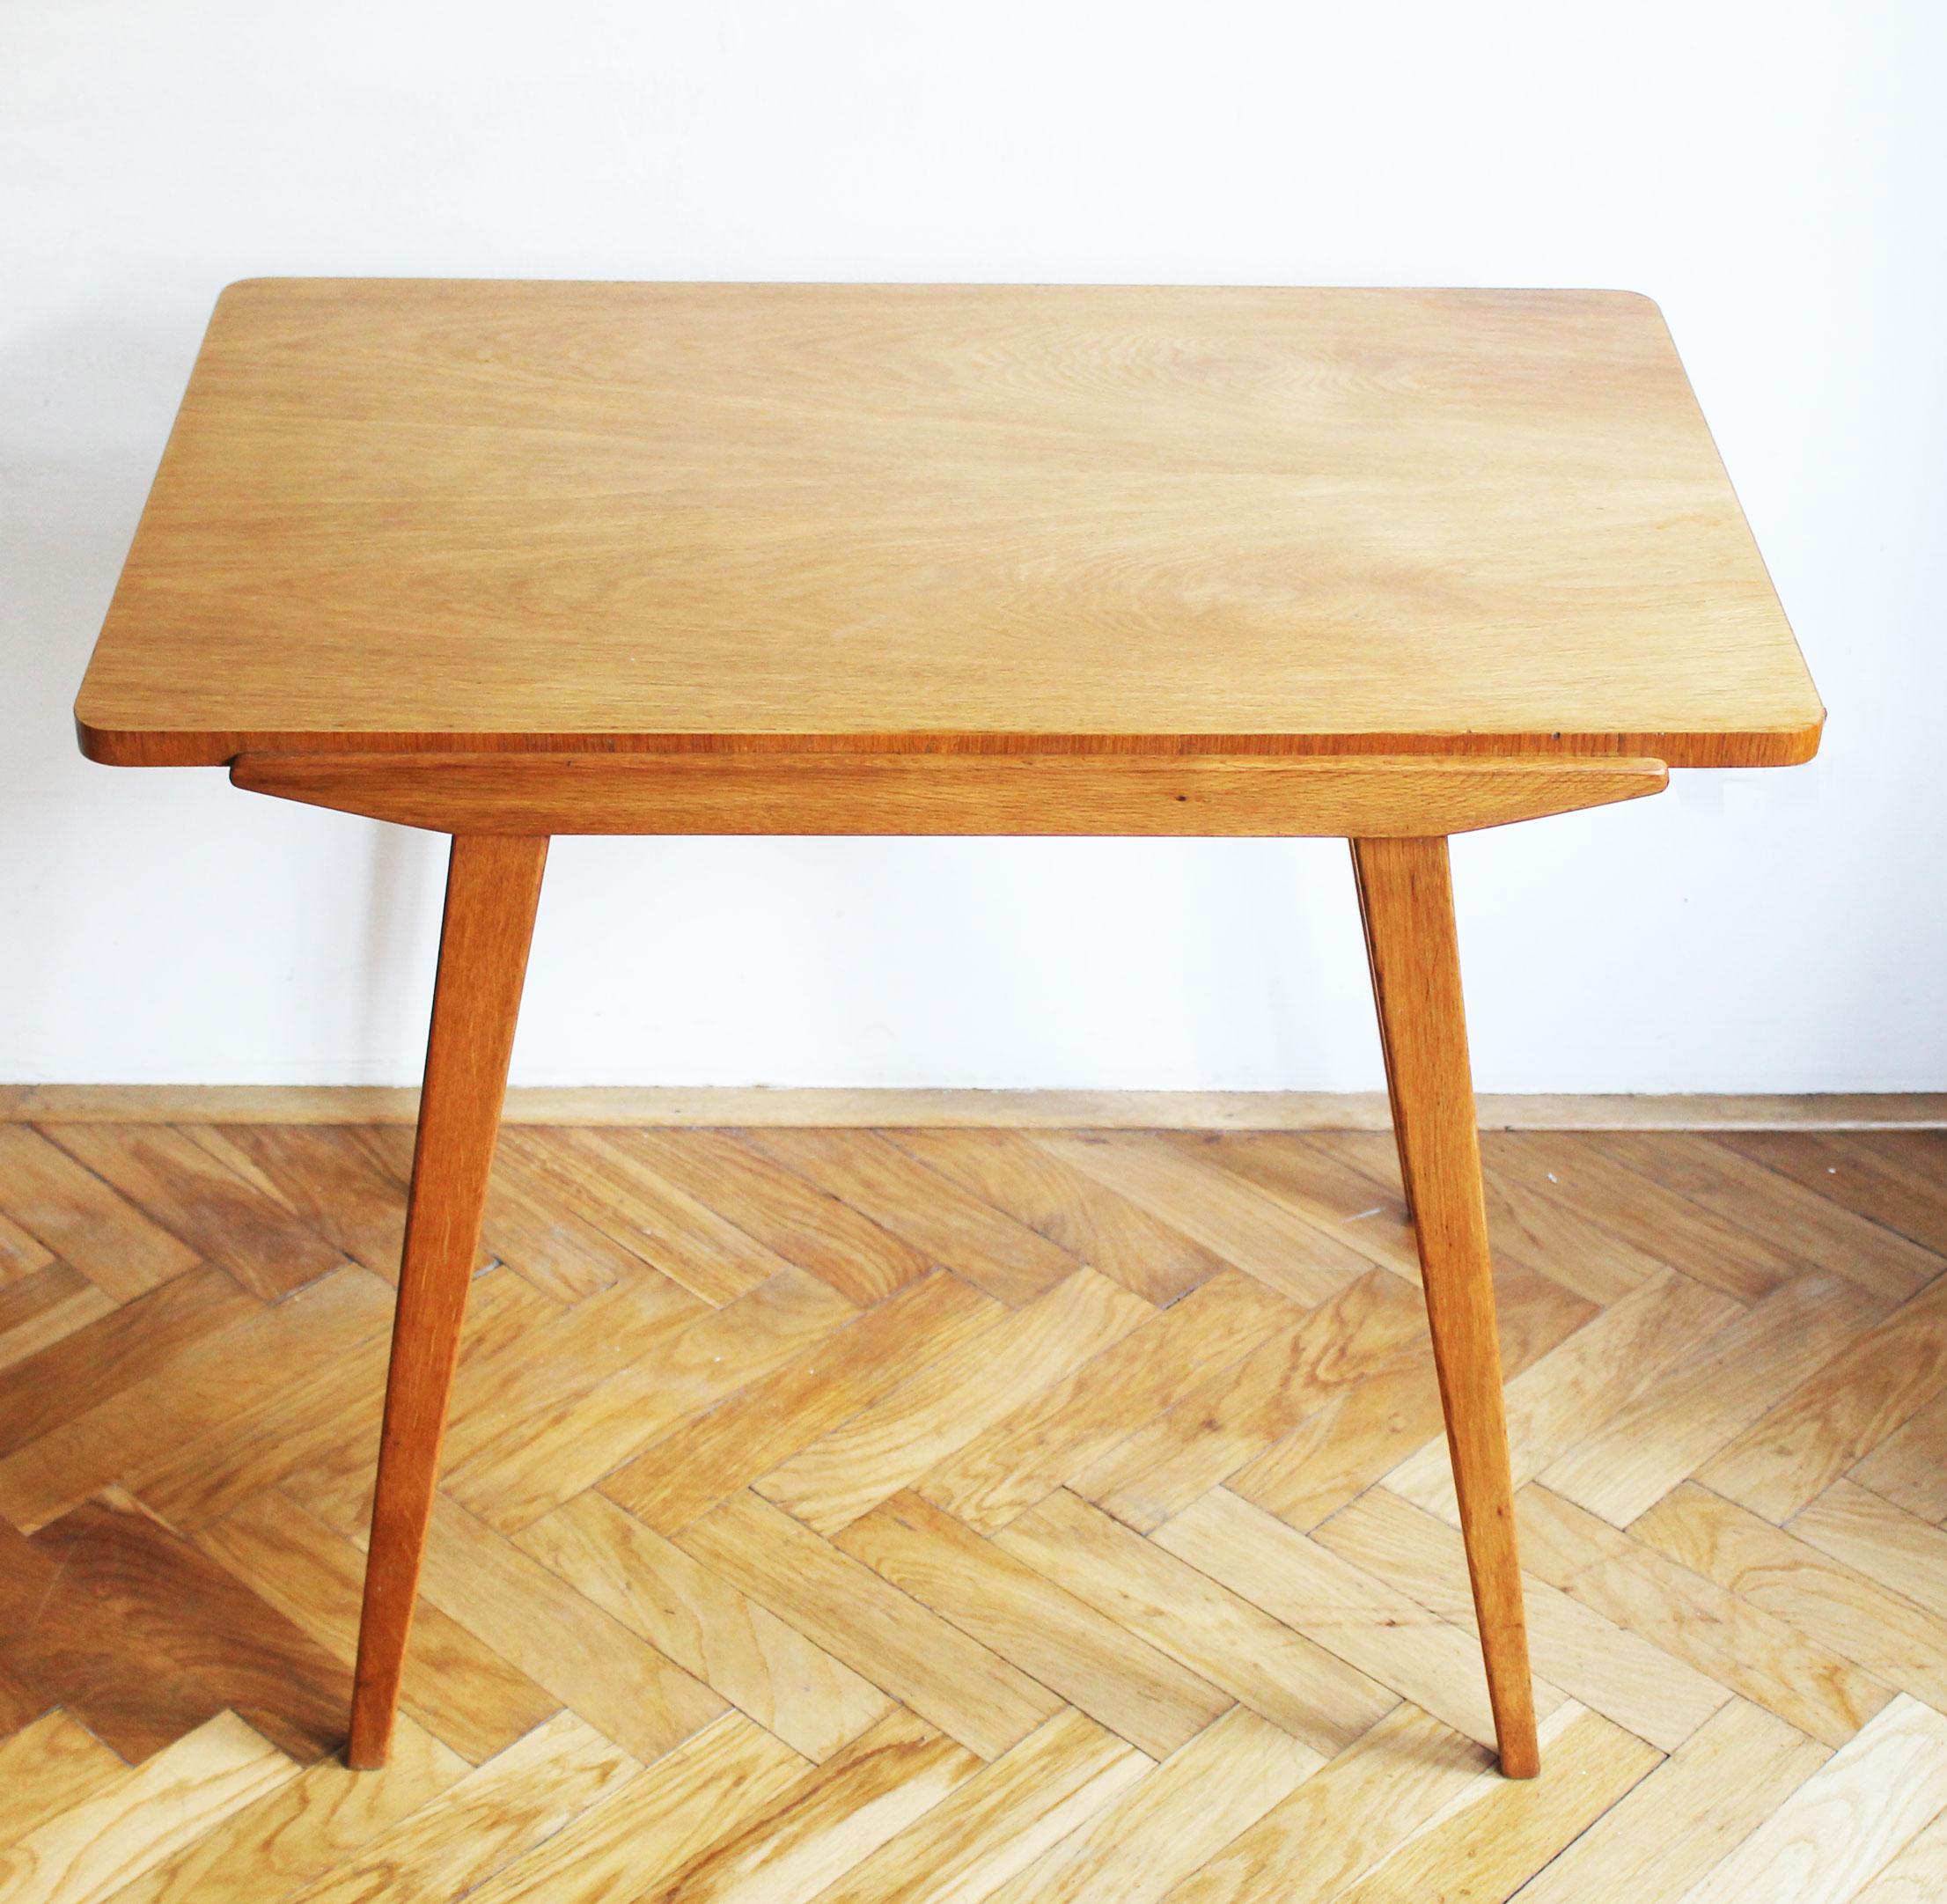 This Mid Century Modern coffee table is made of solid Ash, and has a beautiful grain and elegant tapering table legs. The table was produced by UP Zavody in the 1950’s. Sadly its designer is unknown but the table is very similar to the work of a